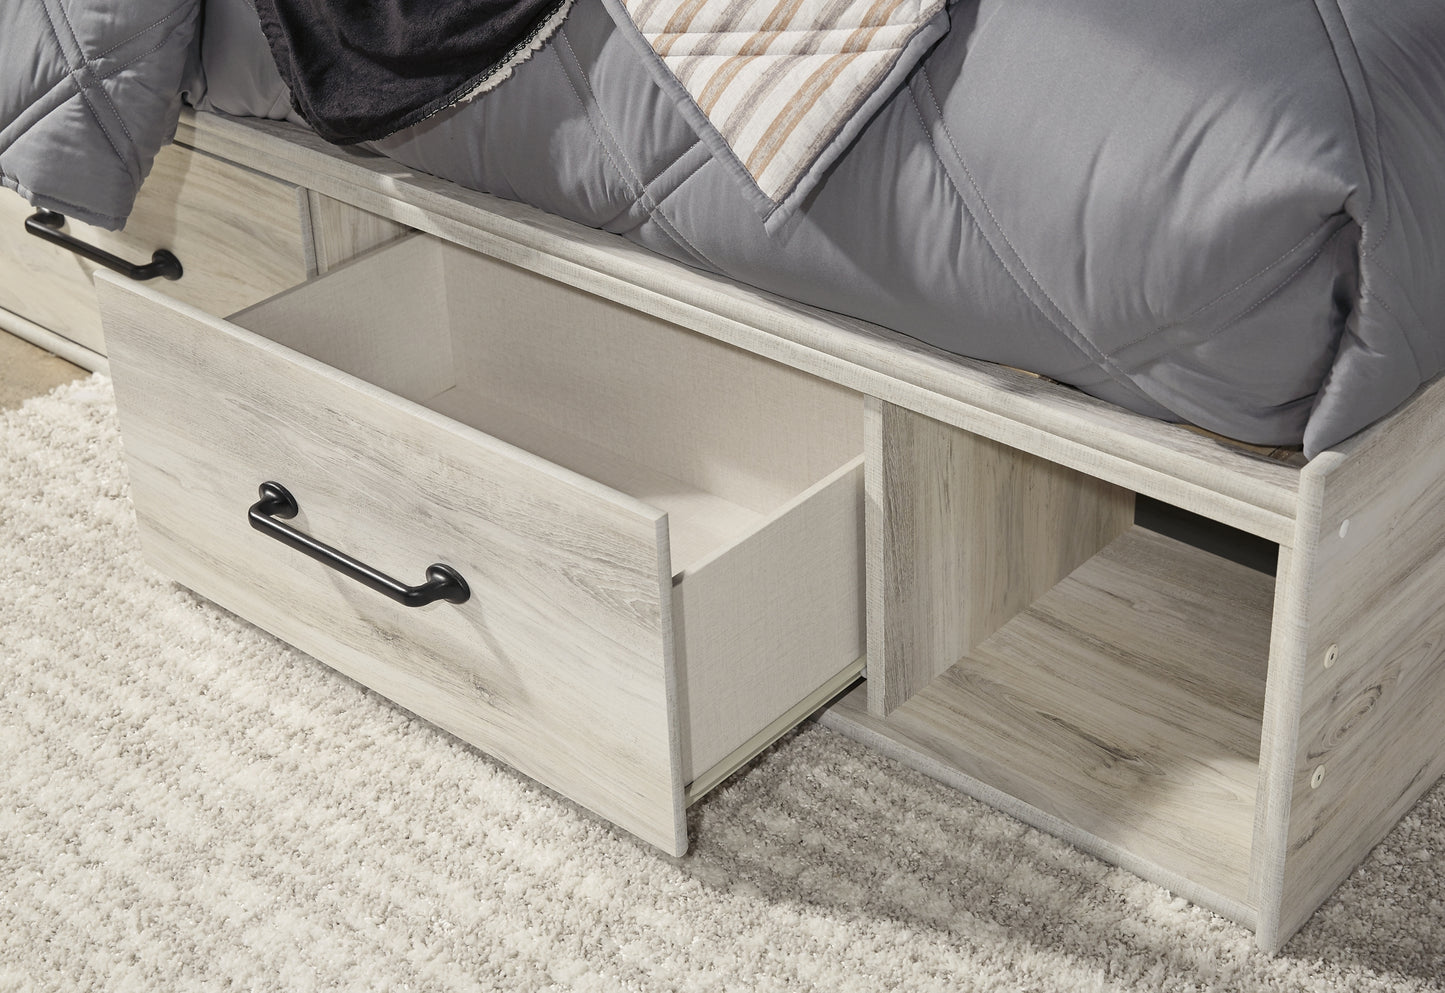 Cambeck Full Panel Bed with 4 Storage Drawers with Mirrored Dresser and Chest JB's Furniture  Home Furniture, Home Decor, Furniture Store